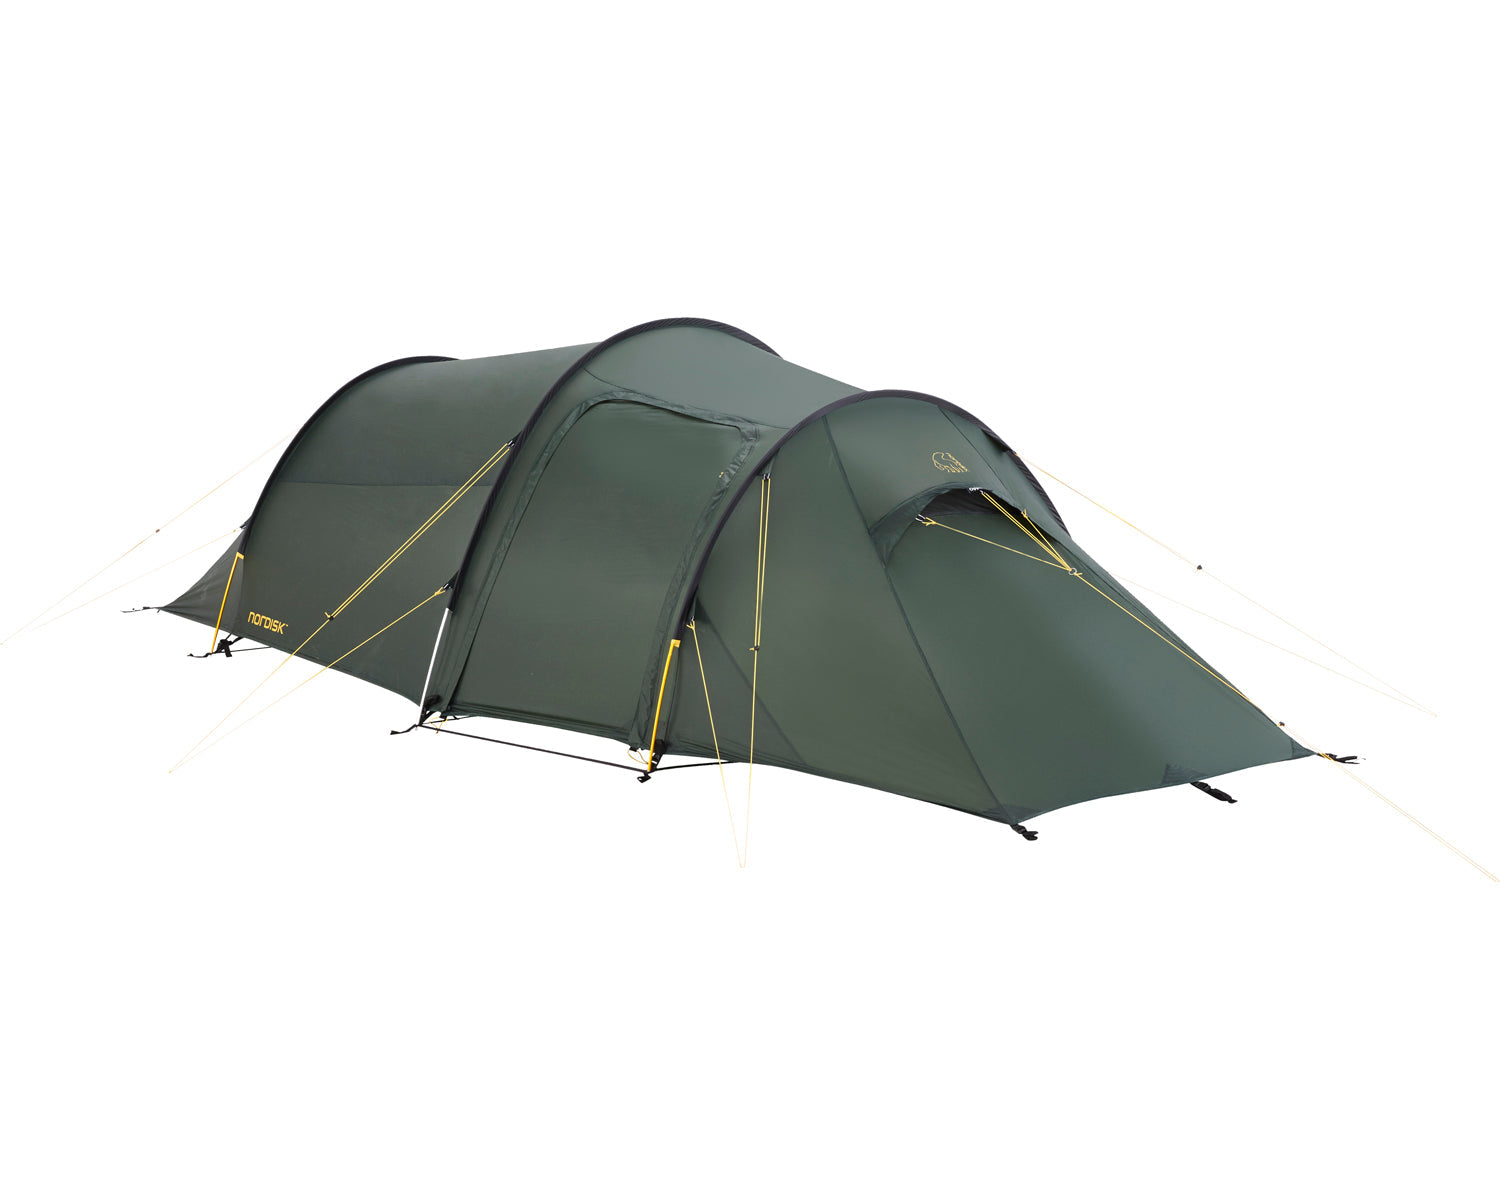 Oppland 2 SI tent - 2 person - Forest Green